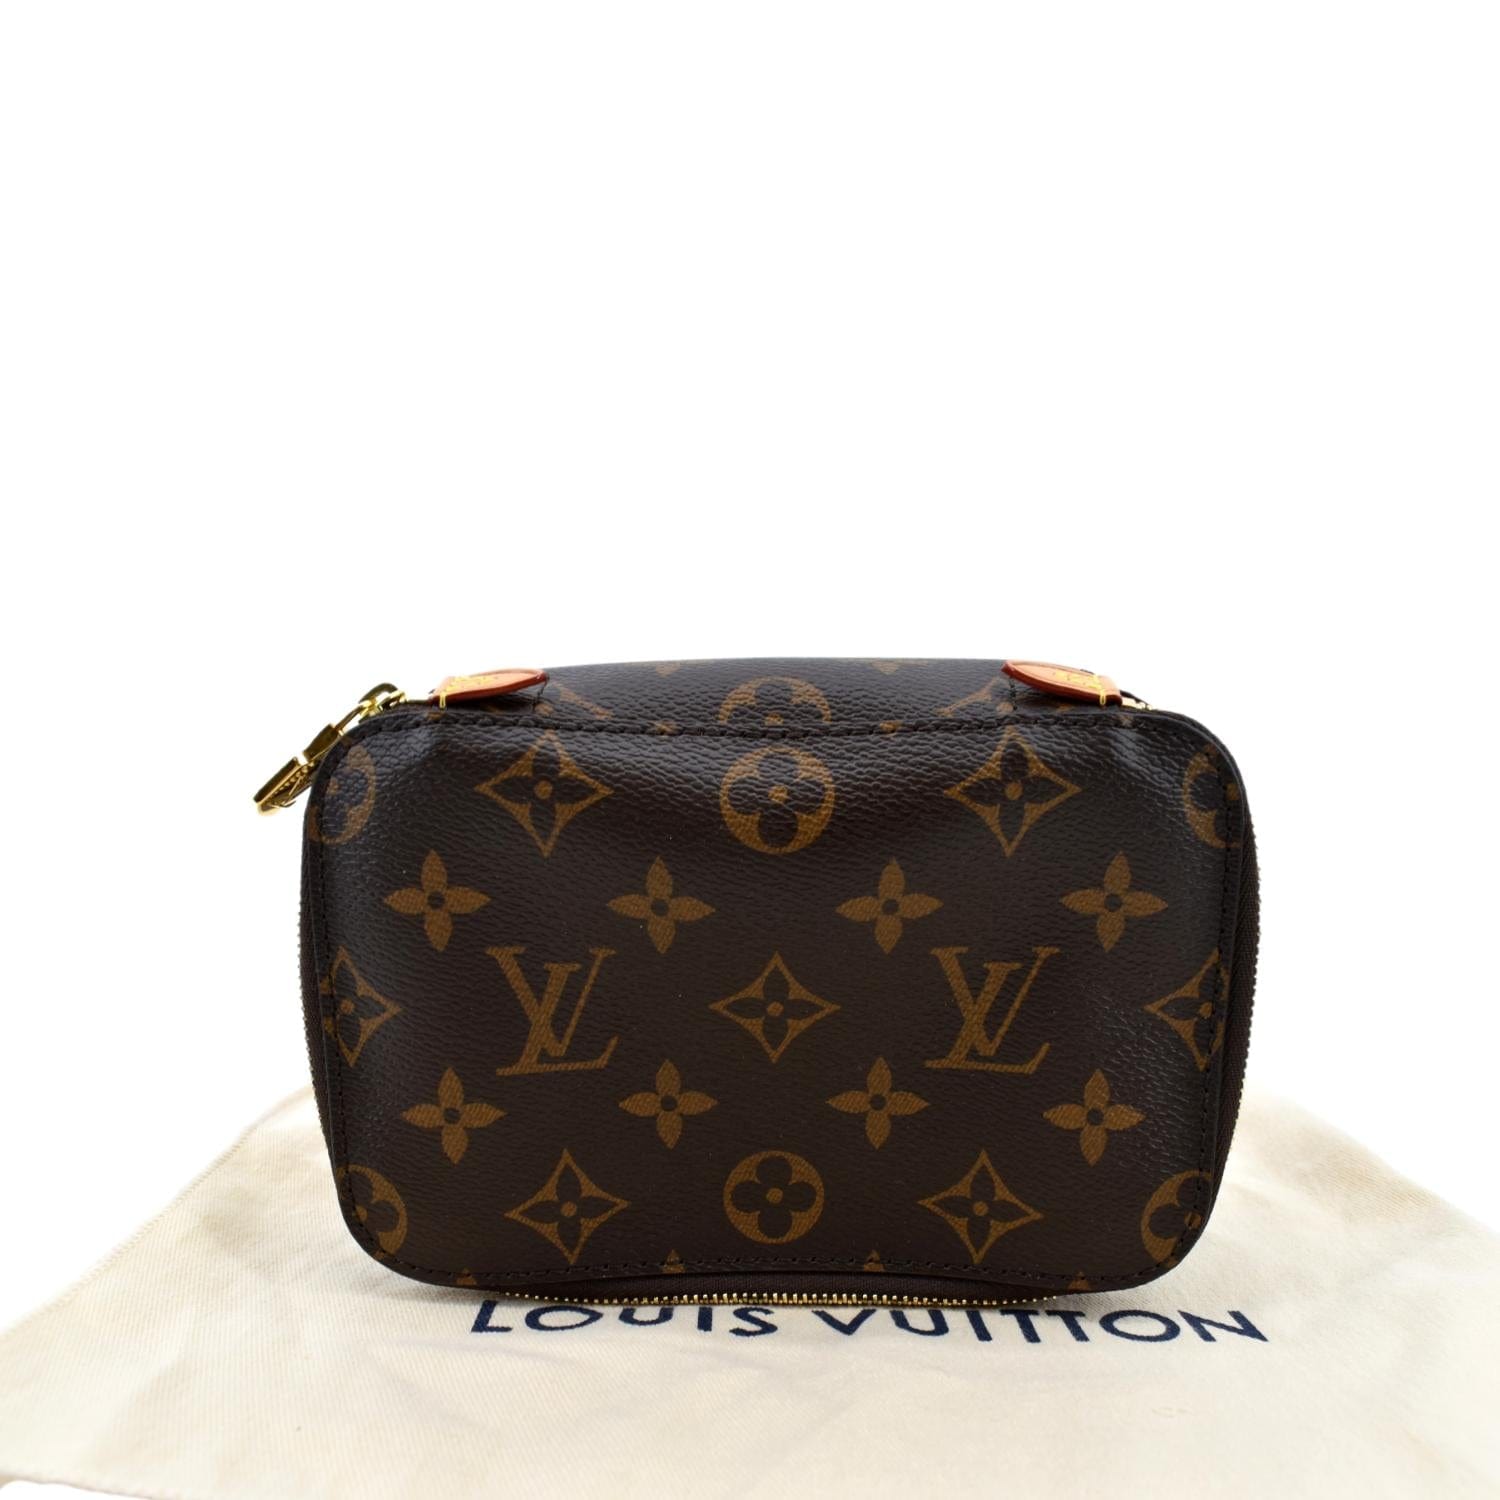 Lv packaging cubes 